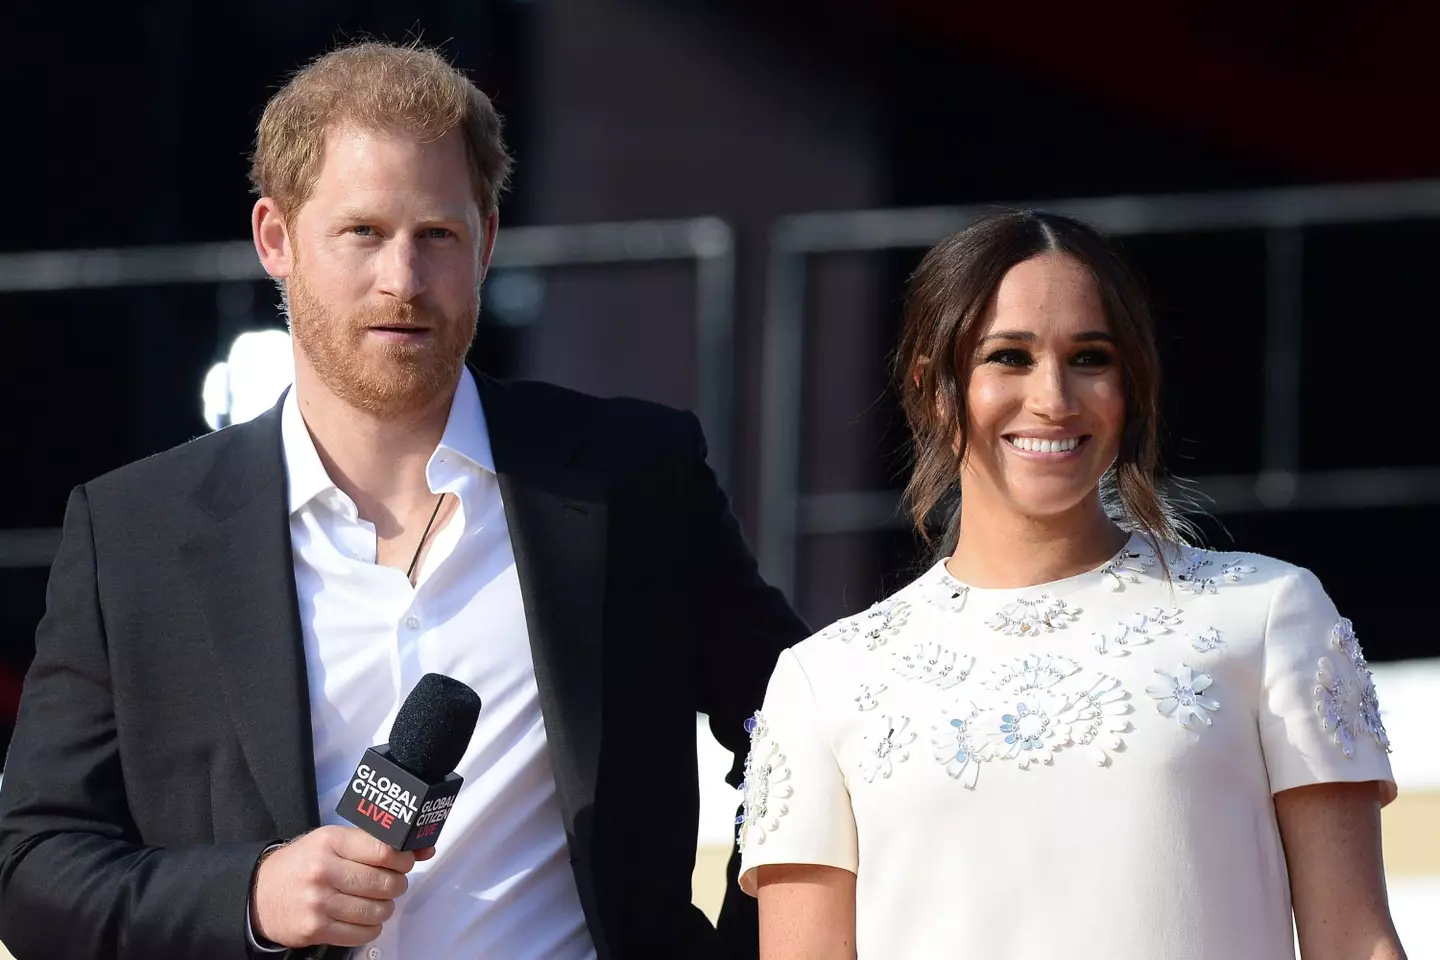 Prince Harry and Meghan Markle moved to the USA in 2020.